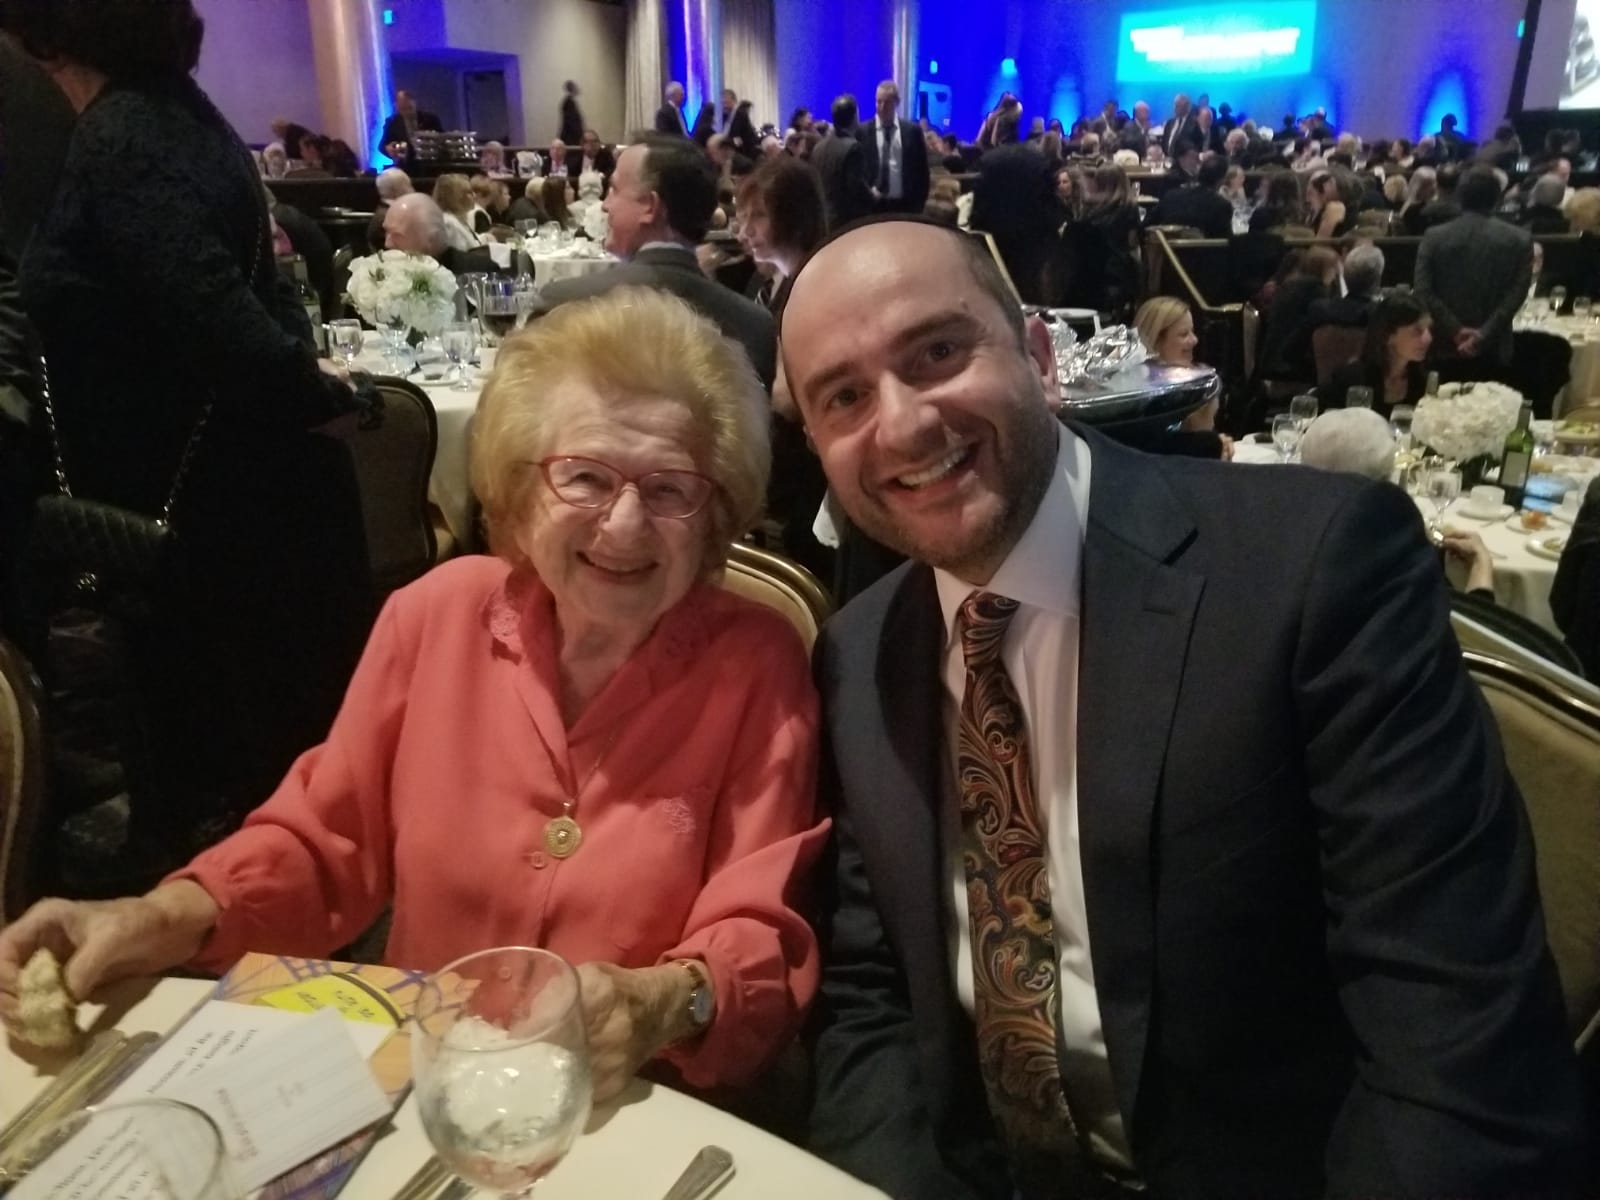 With the remarkable 90-year-old Dr Ruth Westheimer, fellow guest at LAMOTH annual banquet at the Beverly Hilton commemorating the 80th anniversary of Kindertransport, December 3, 2018